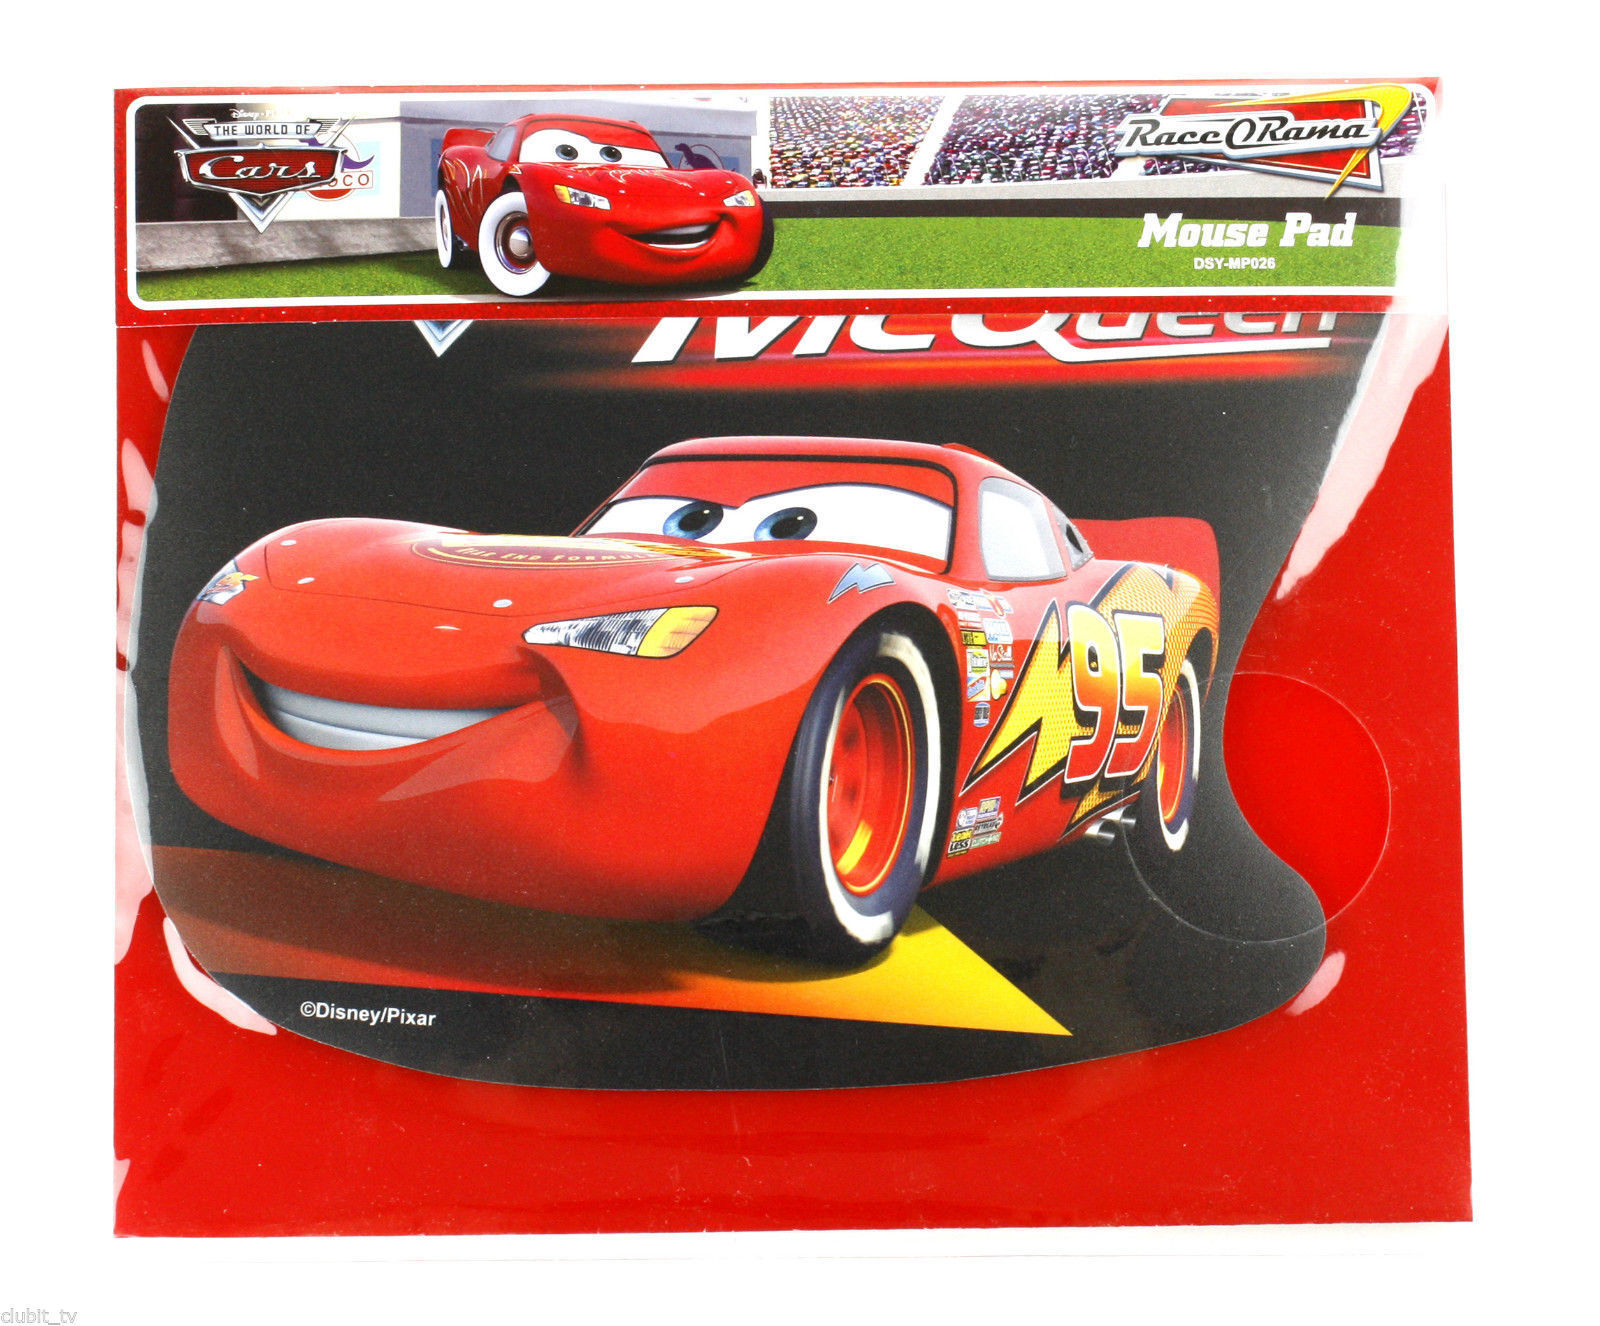 Computer Mouse Mat Pad Disney Pixar Cars McQueen DSY-MP026 PC Great Gift NEW